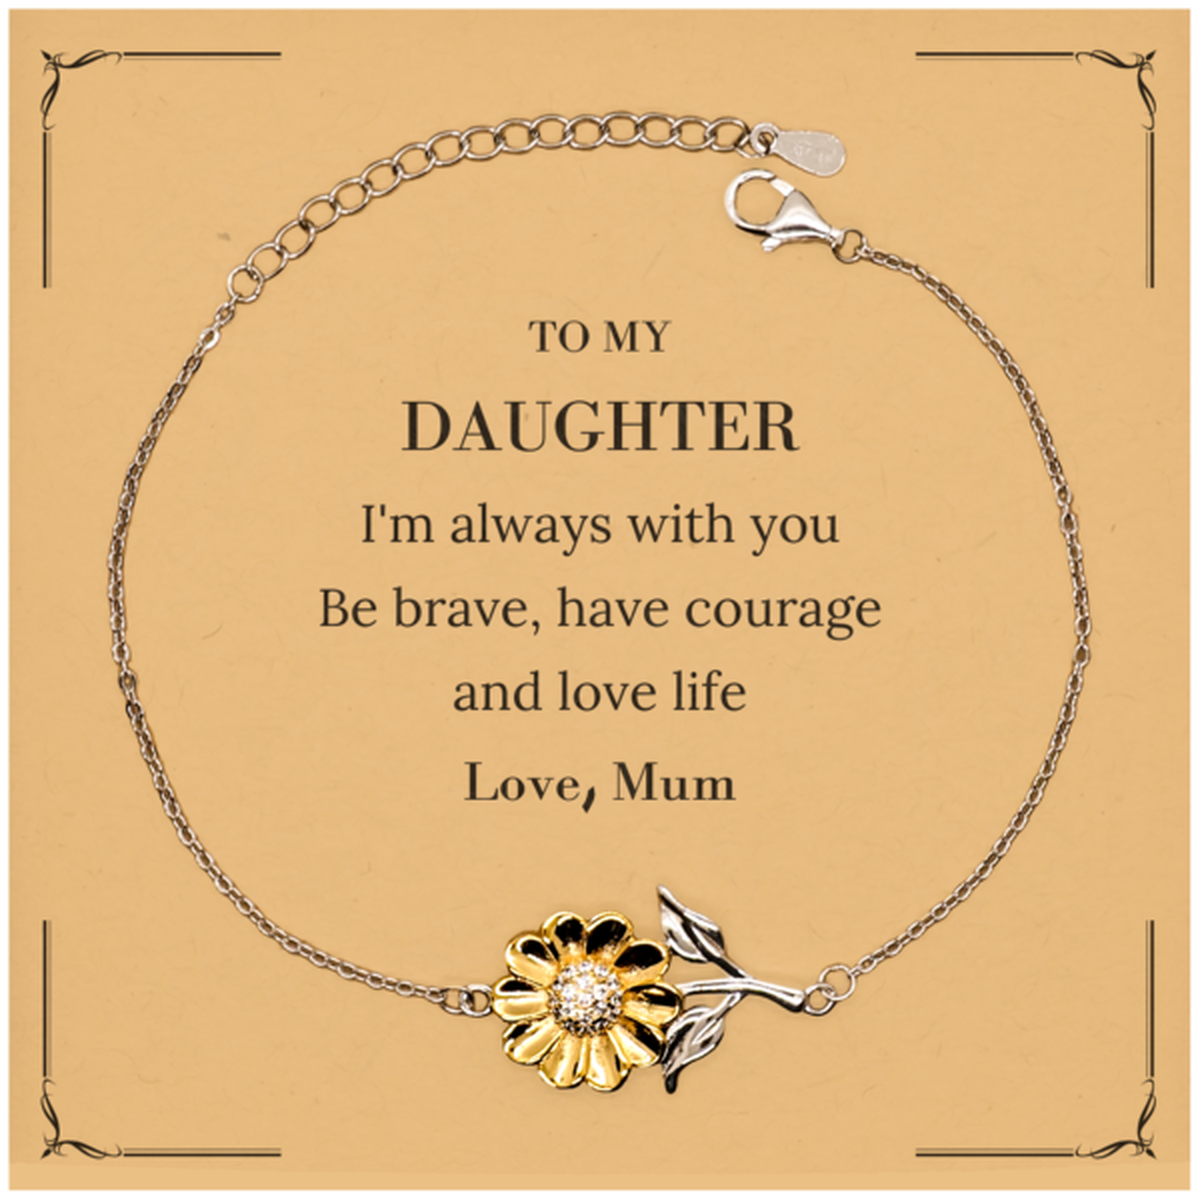 To My Daughter Gifts from Mum, Unique Sunflower Bracelet Inspirational Christmas Birthday Graduation Gifts for Daughter I'm always with you. Be brave, have courage and love life. Love, Mum